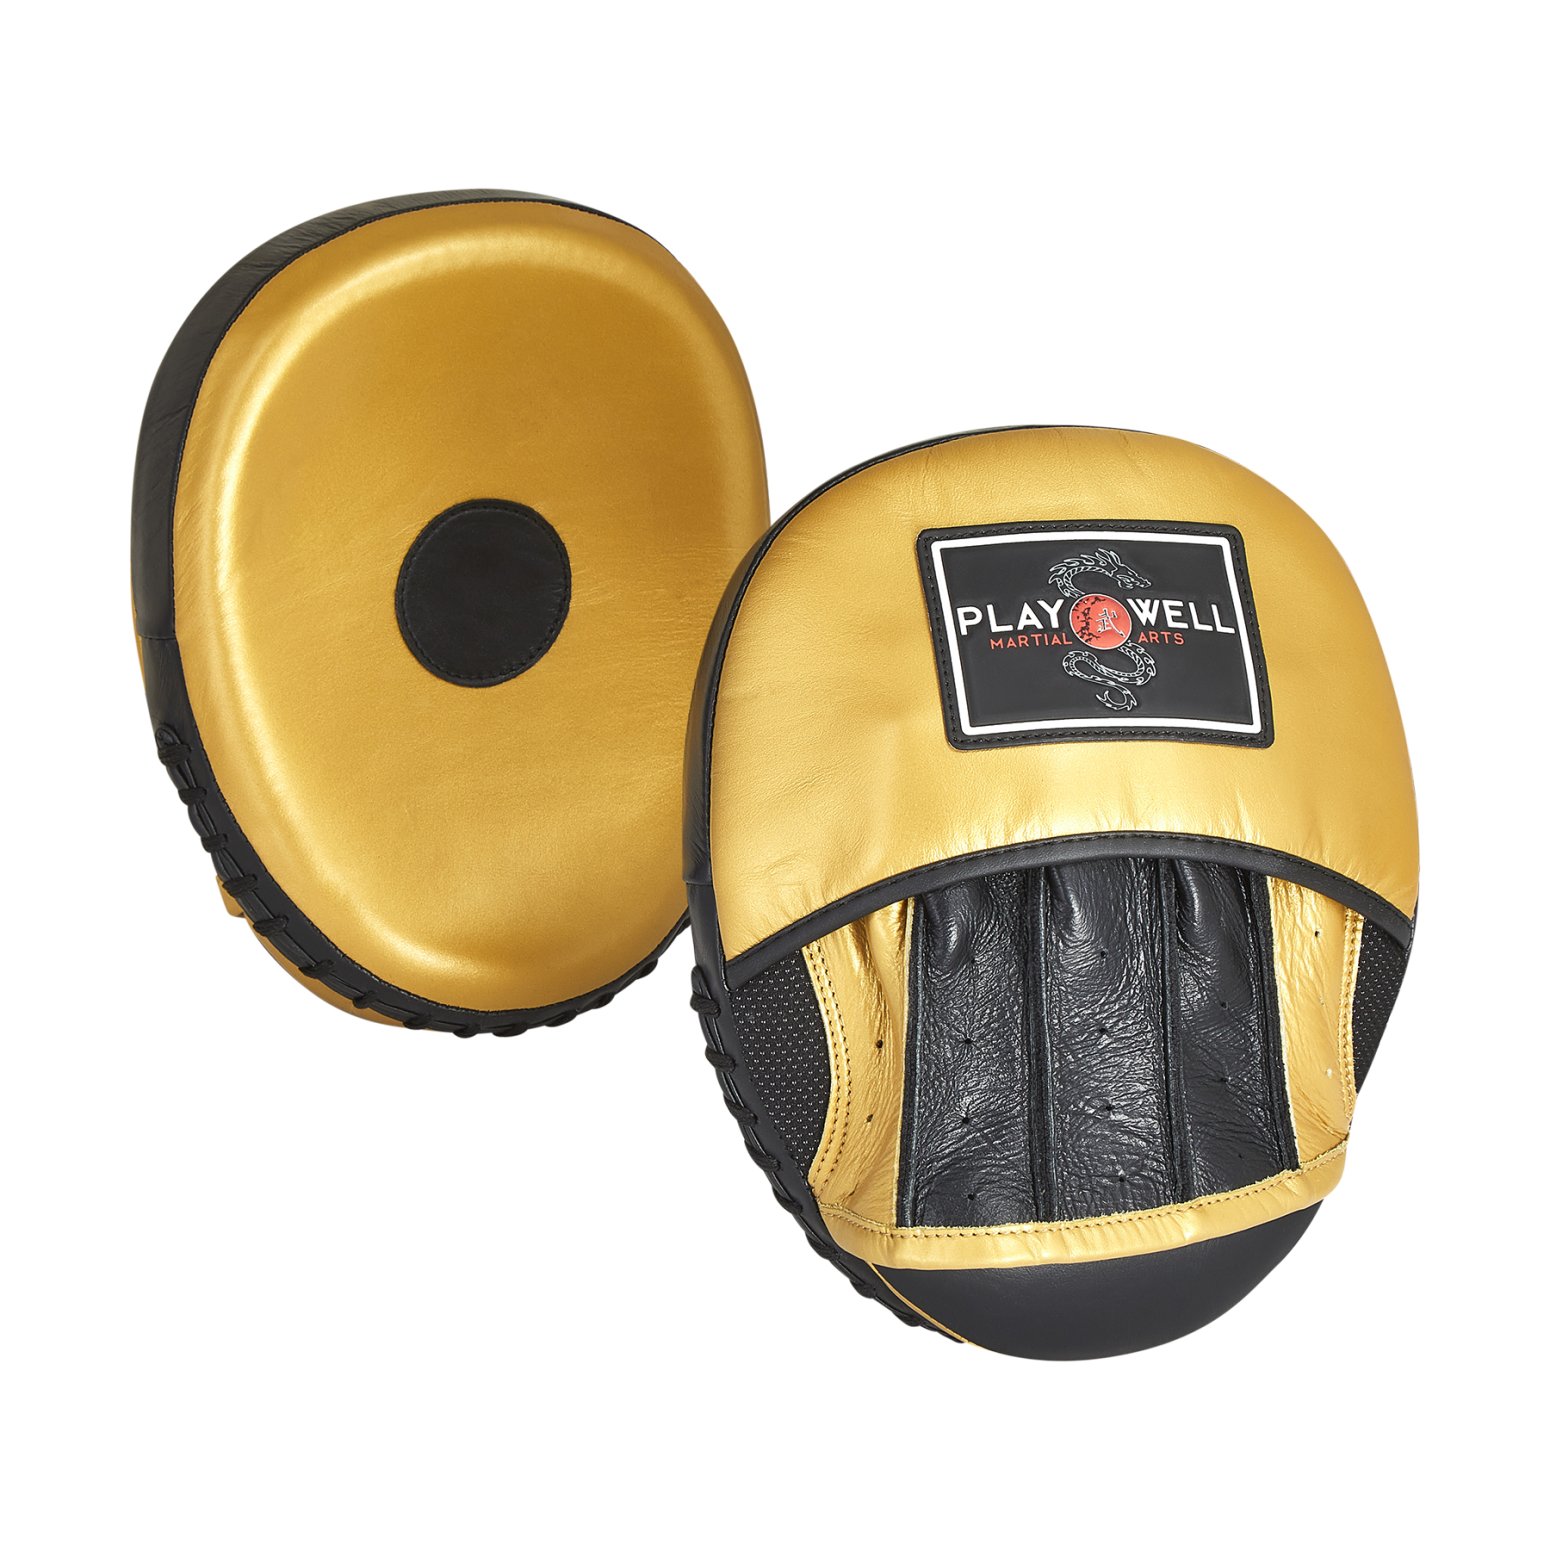 Playwell Premium Gold "Champion" Leather Focus Pads - Click Image to Close